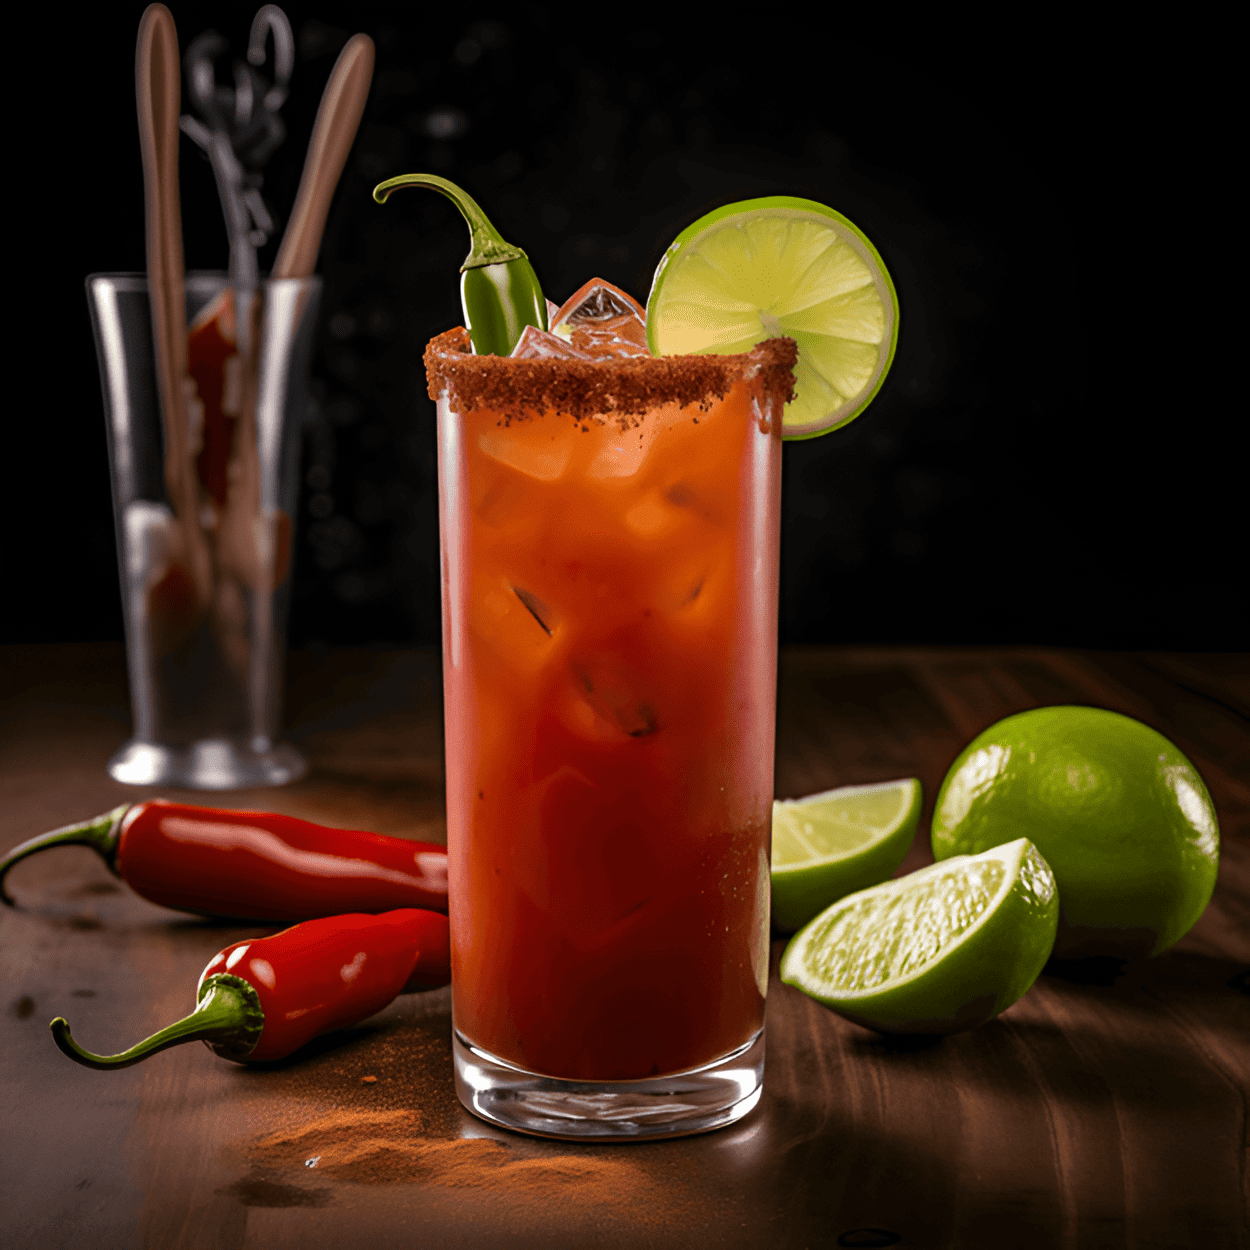 Tequila Bloody Mary? Why Not? Try This Trending Recipe! - The Bloody Maria is a savory, spicy, and tangy cocktail with a hint of smokiness from the tequila. It has a rich tomato base, complemented by the heat of hot sauce and the freshness of lime.